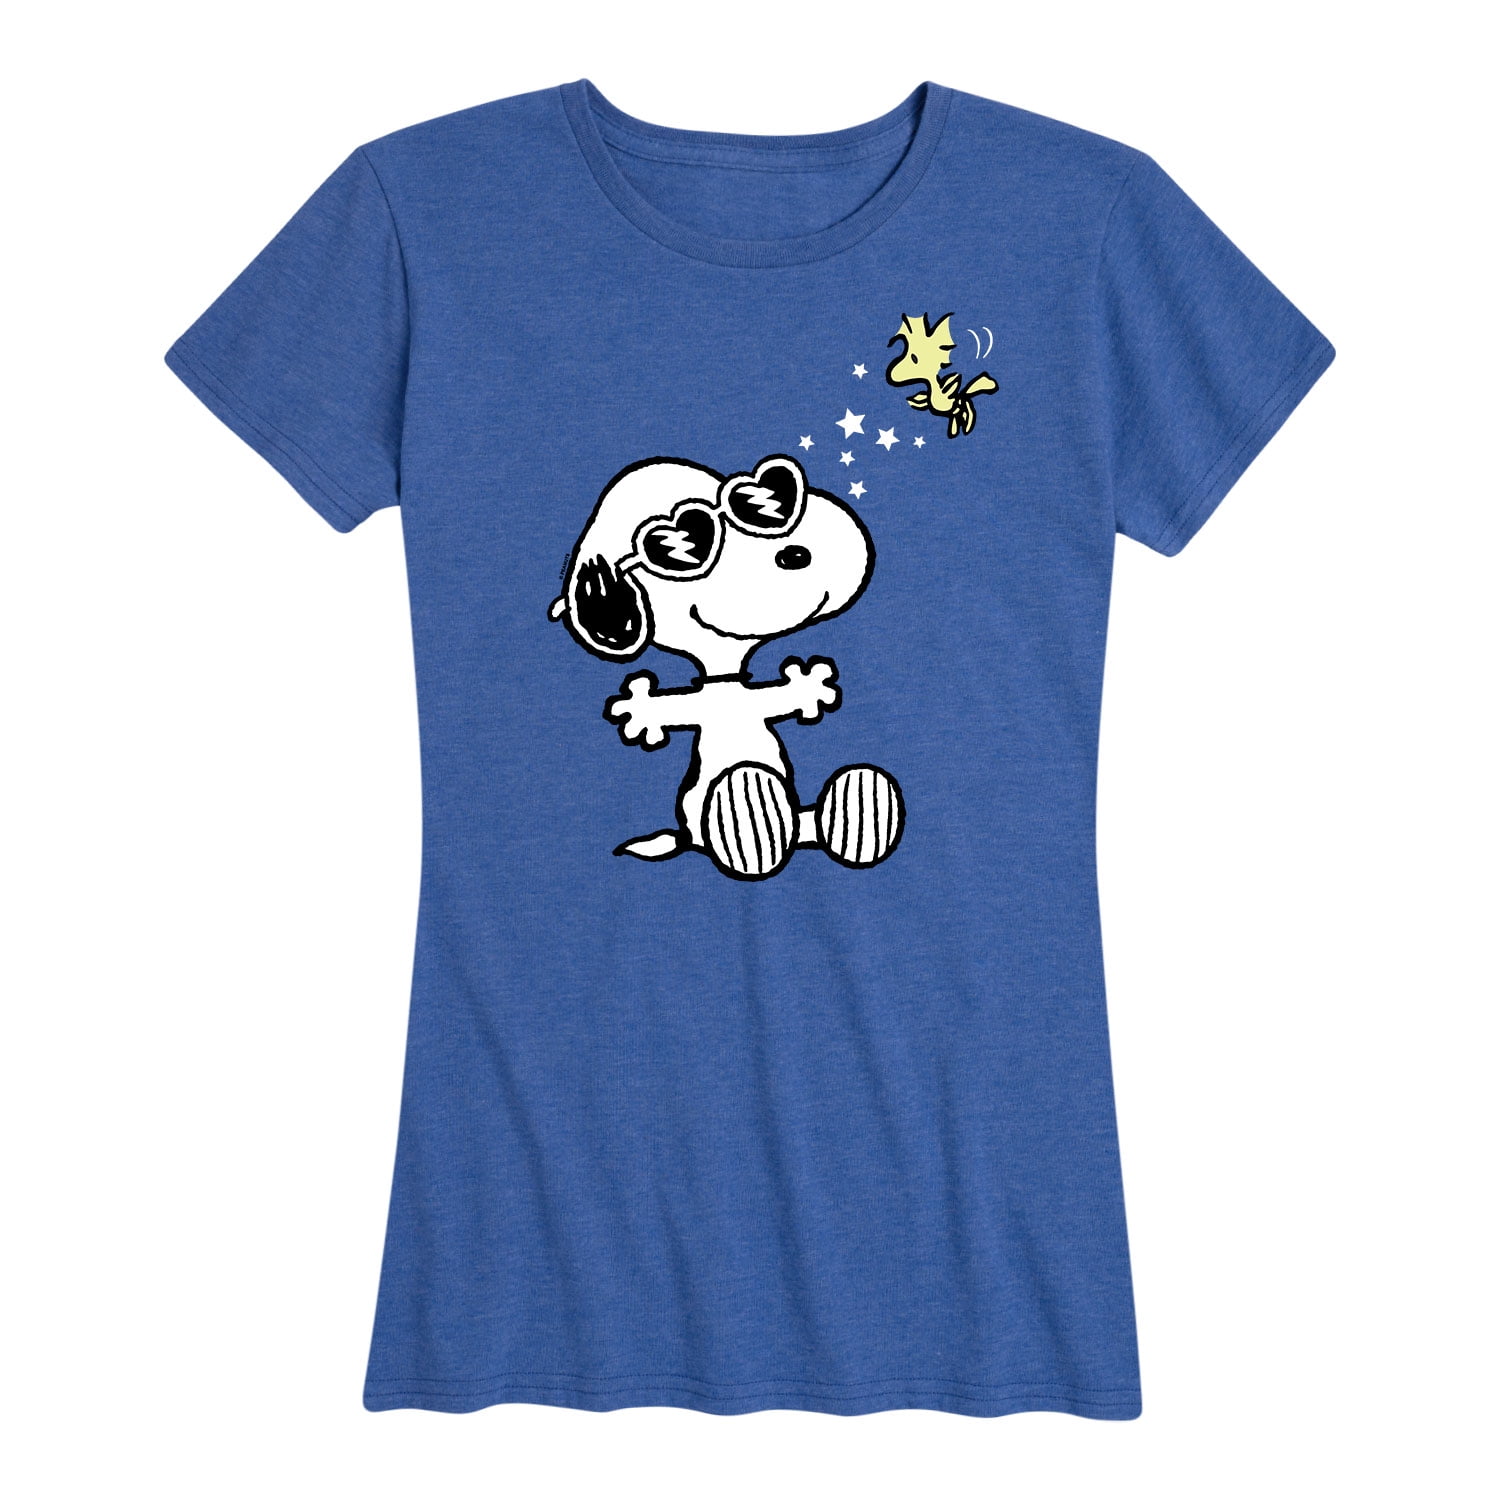 Peanuts - Faces of Snoopy Sleeve T-Shirt Graphic Women\'s - Short